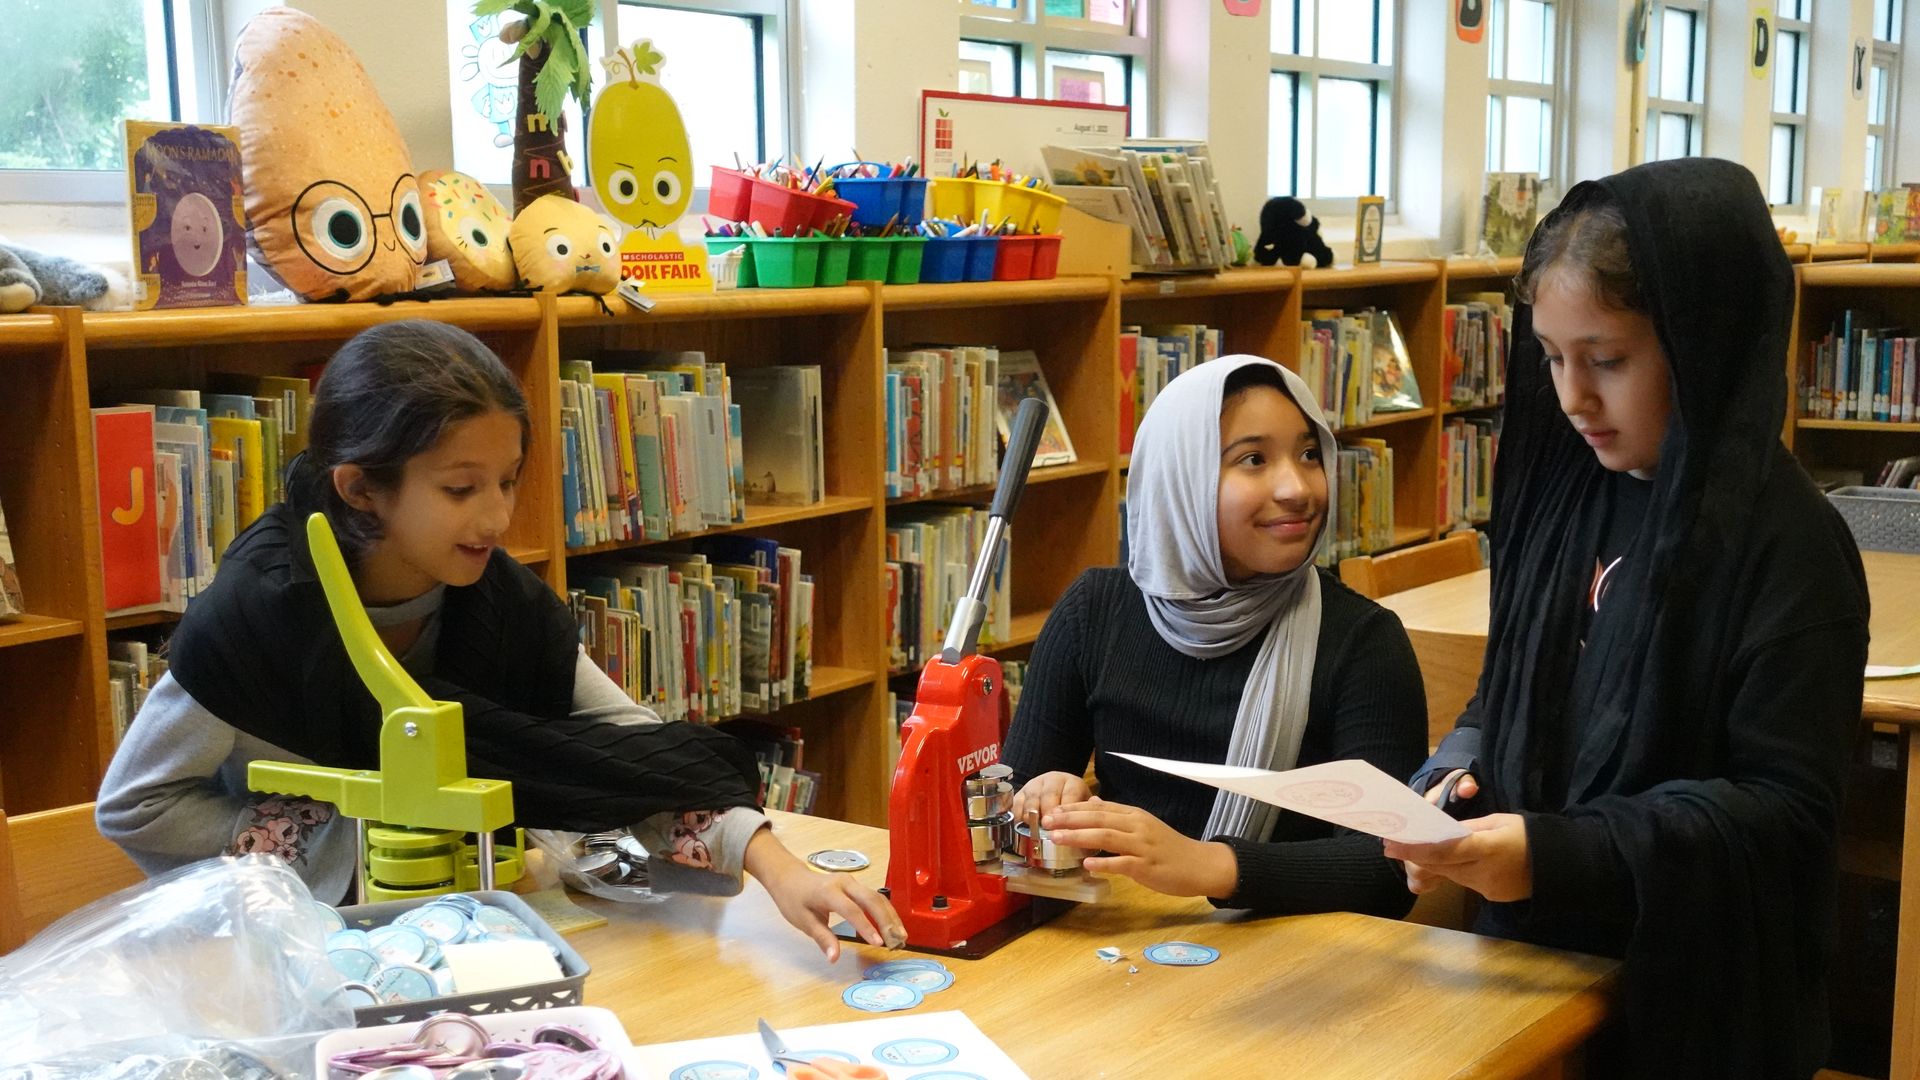 A photo of the three girls designing their pins with library books in the background.